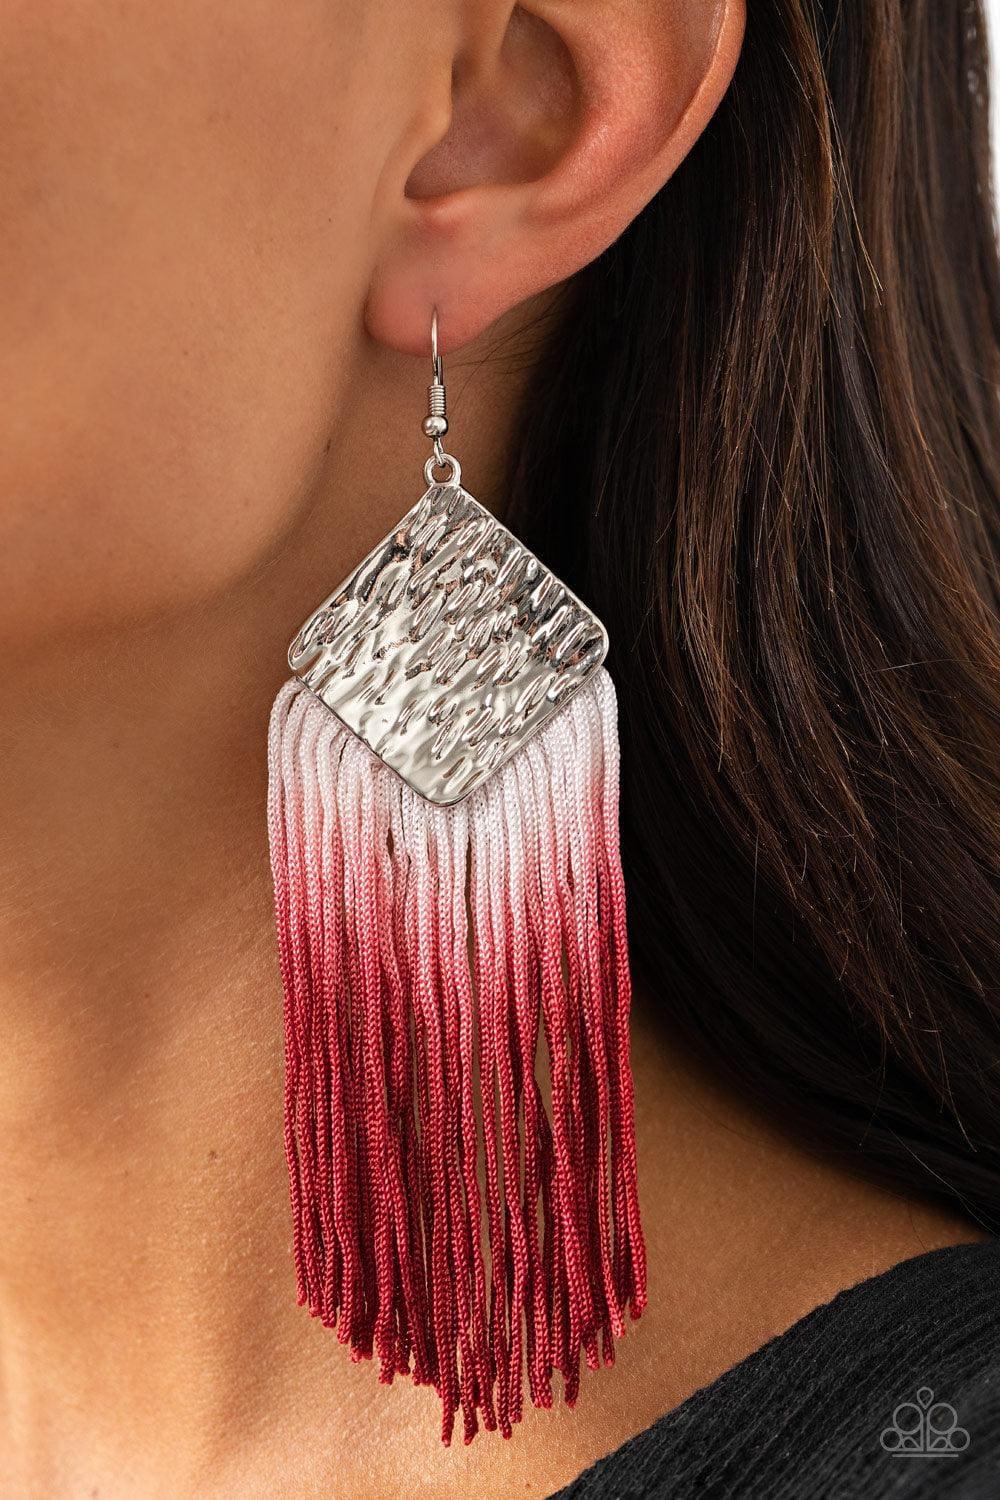 Paparazzi Accessories - Dip The Scales - Red Earrings - Bling by JessieK